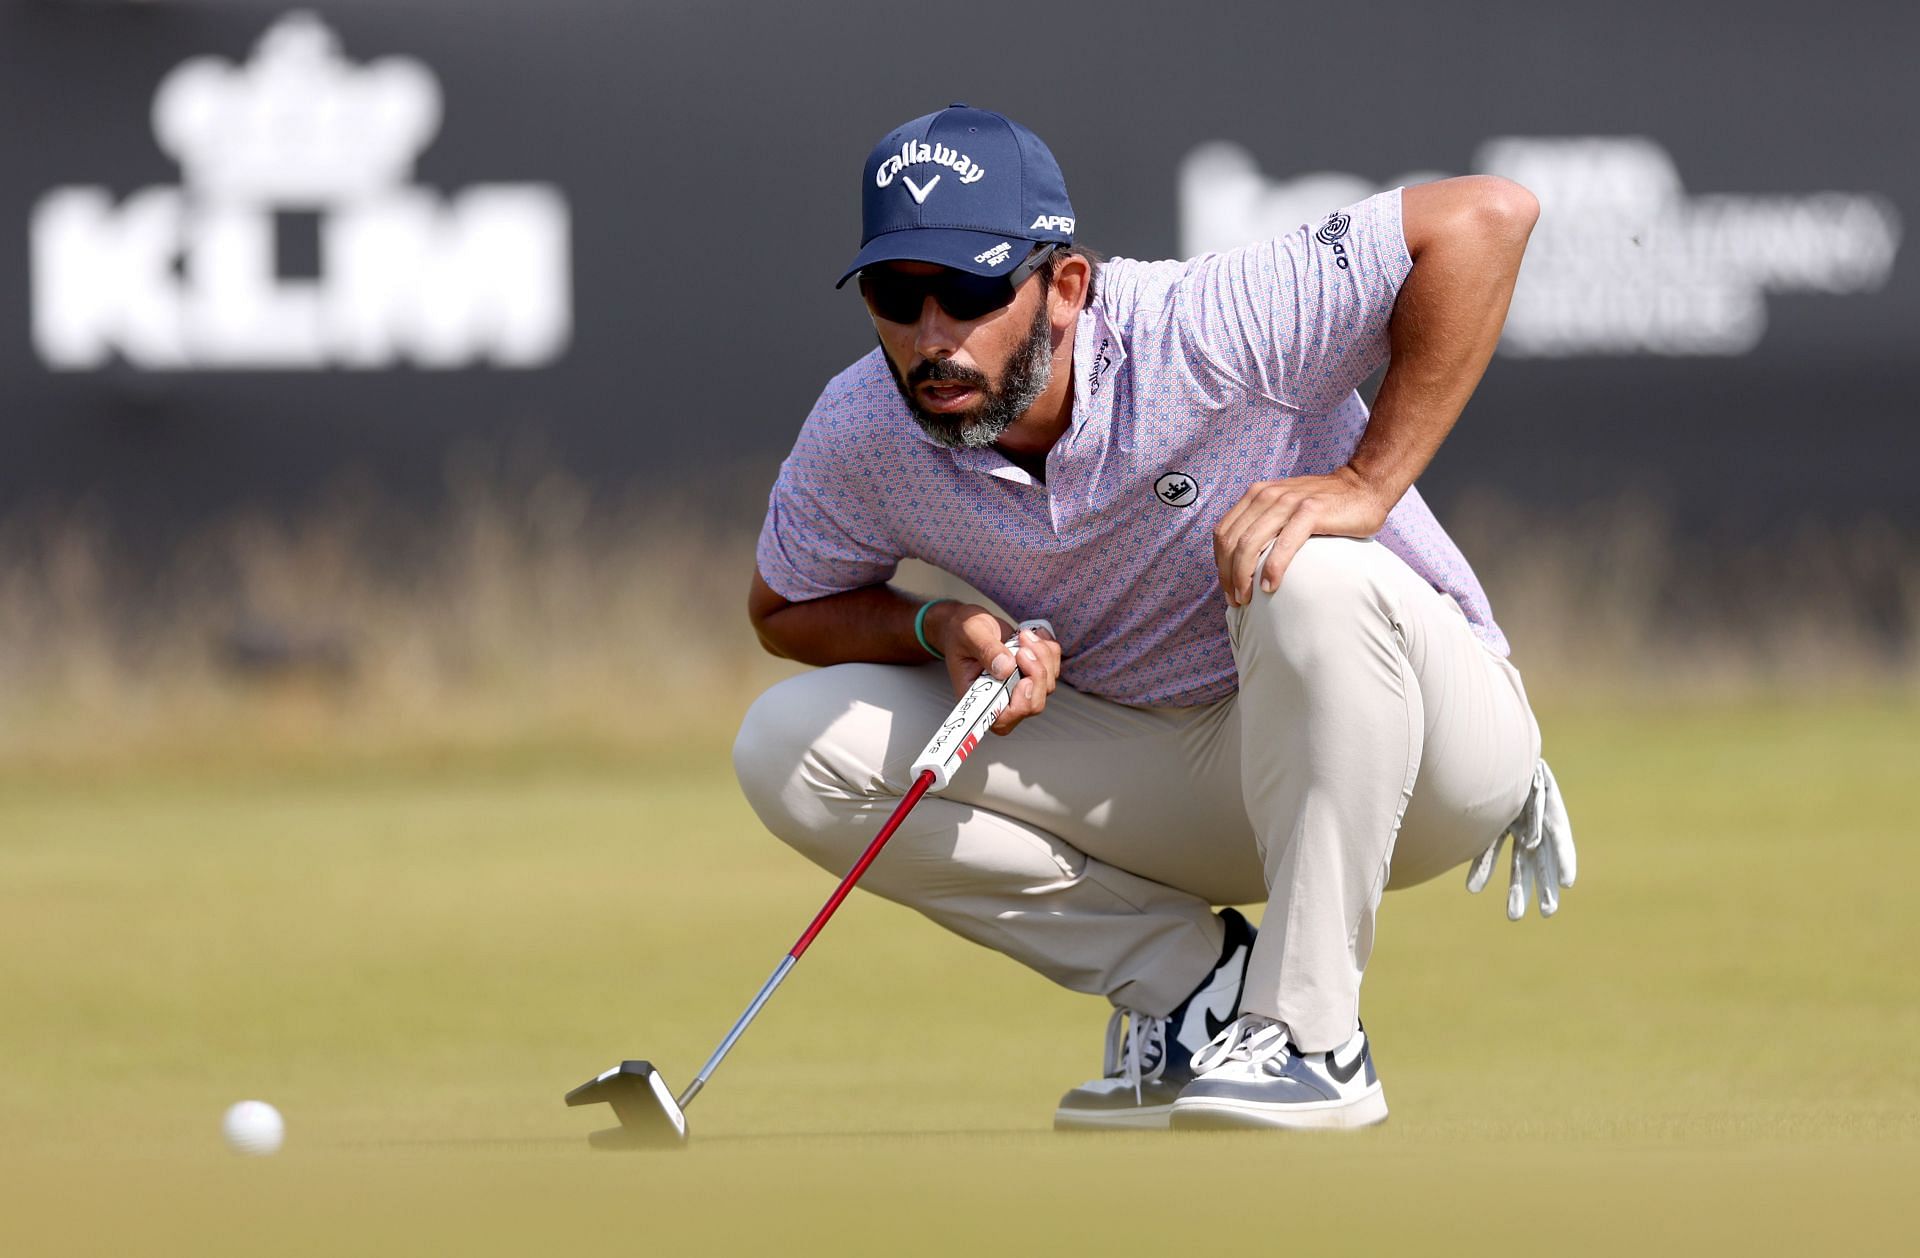 KLM Open - Day Four